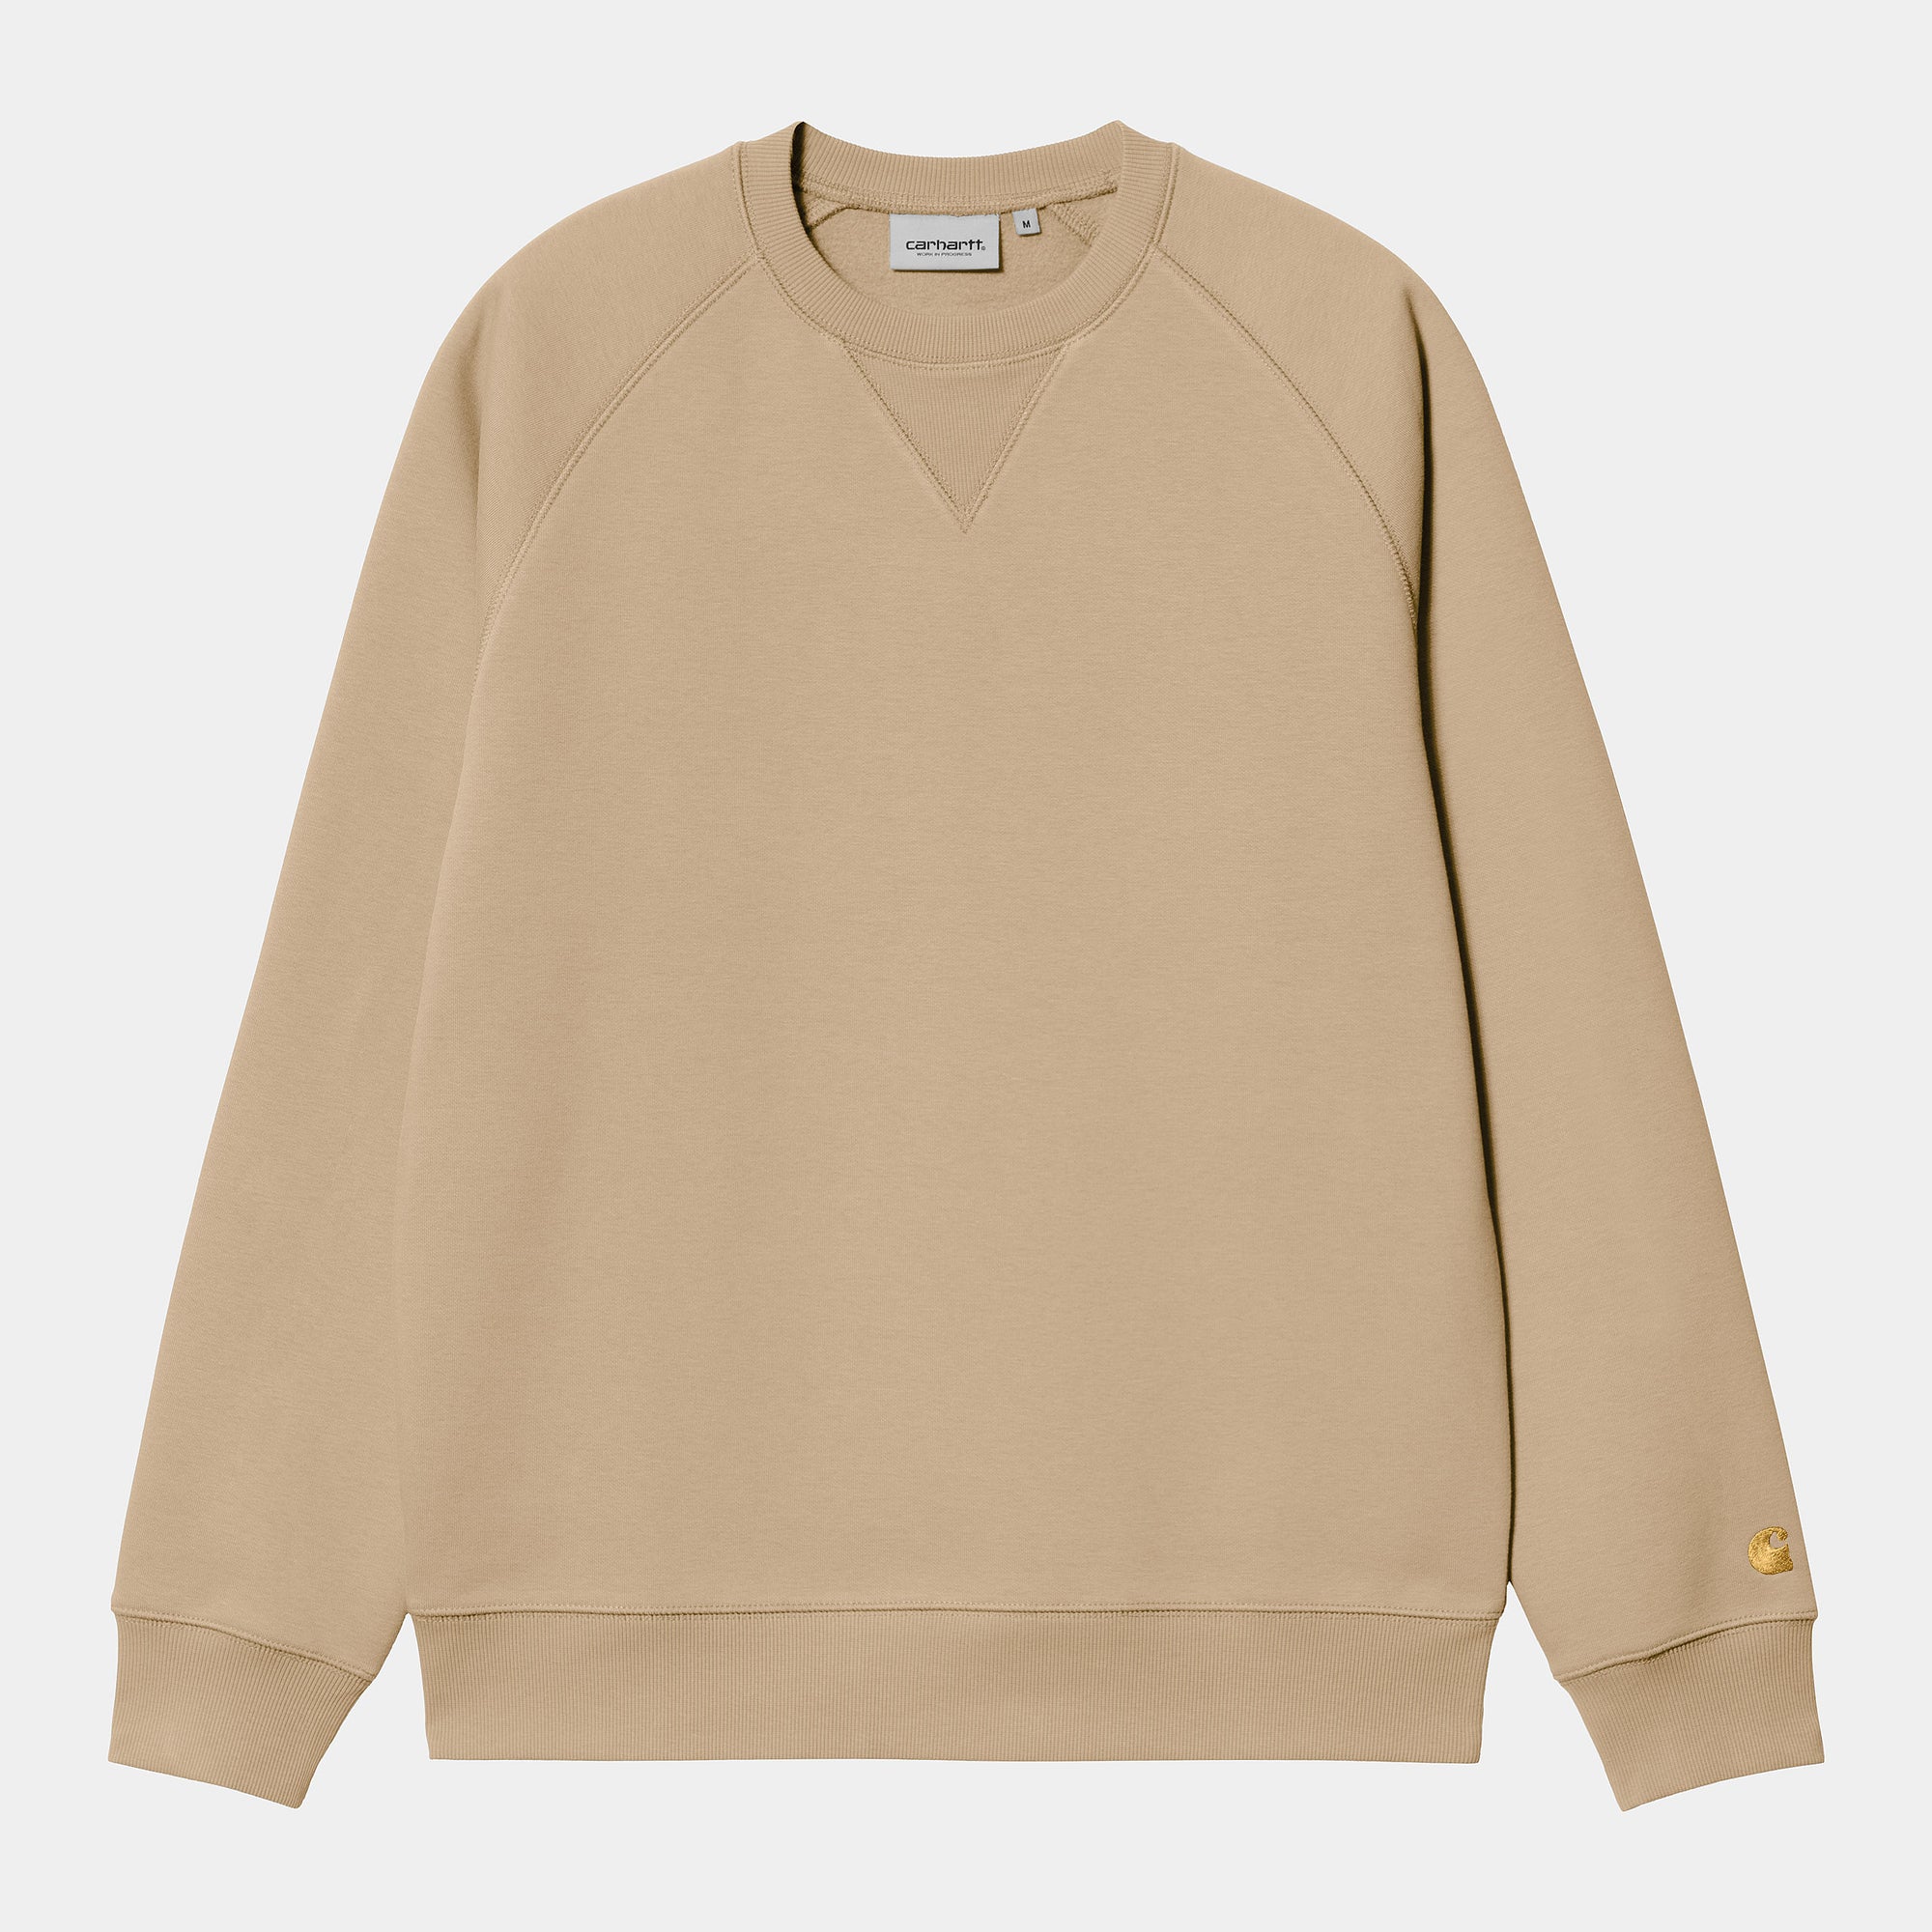 Carhartt WIP Chase Sweat - Sable / Gold